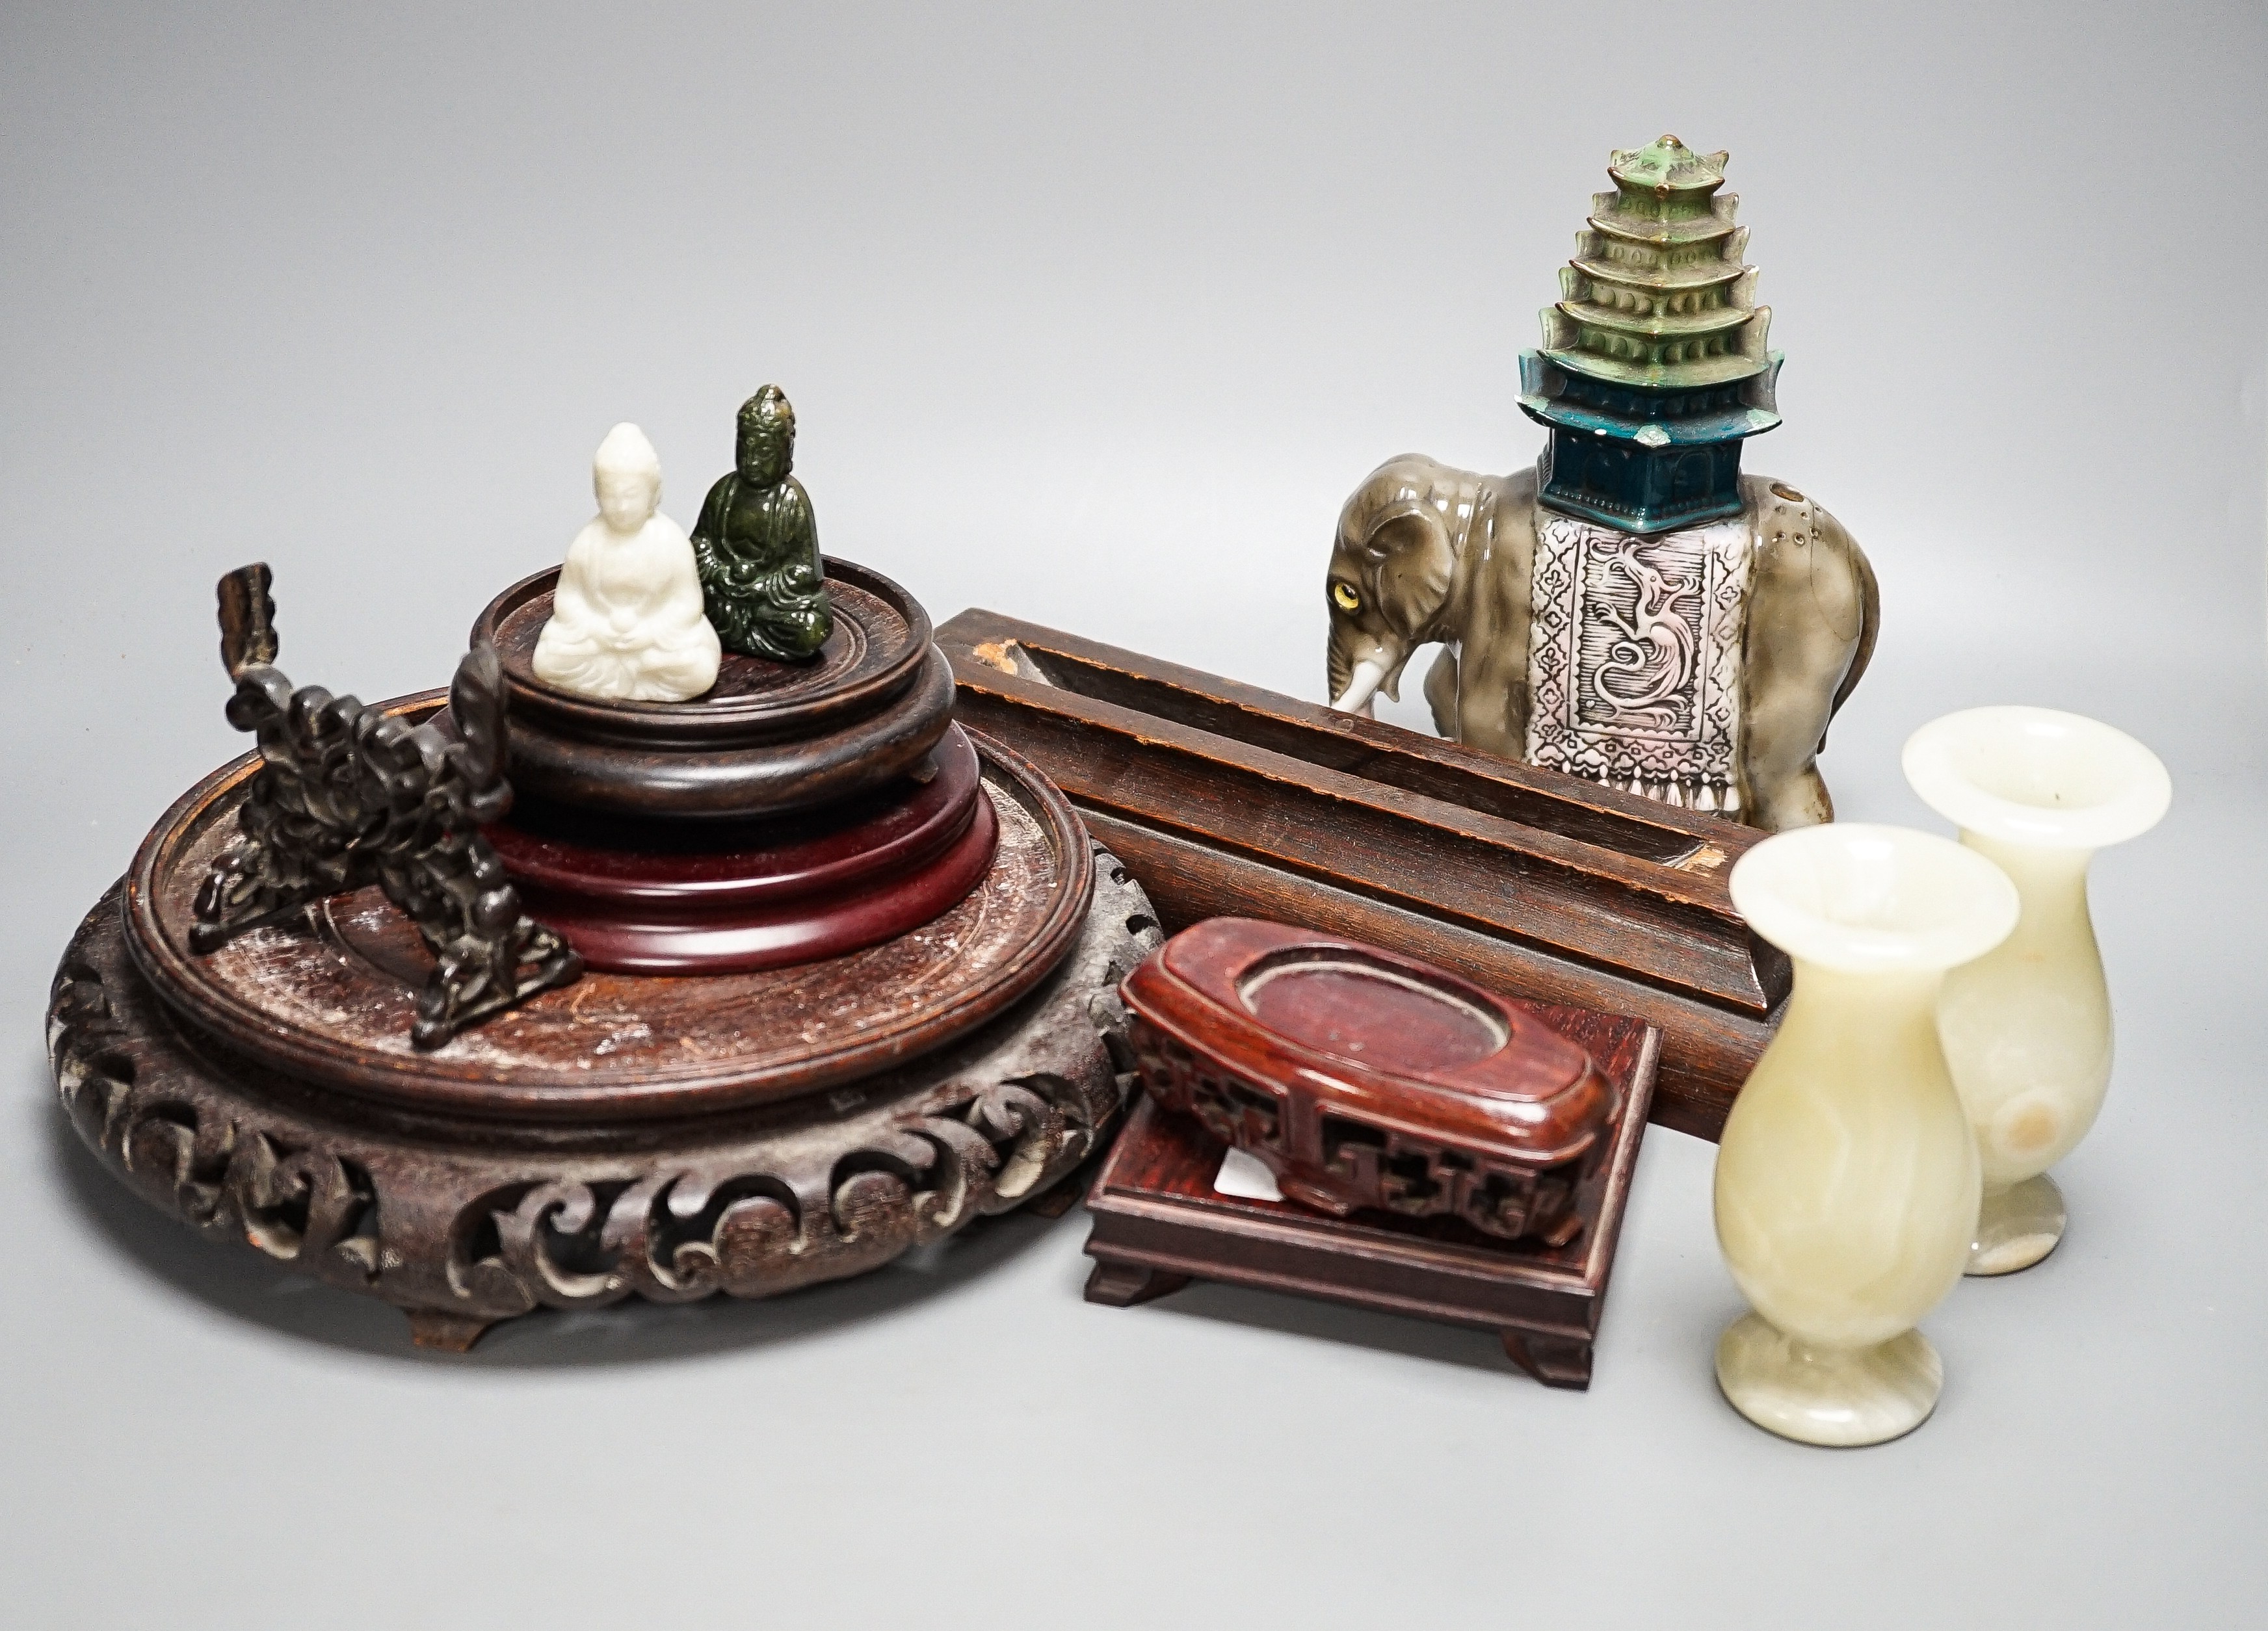 A pair of hard stone vases, 2 hard stone figural carvings, a porcelain elephant, and a quantity of hardwood stands